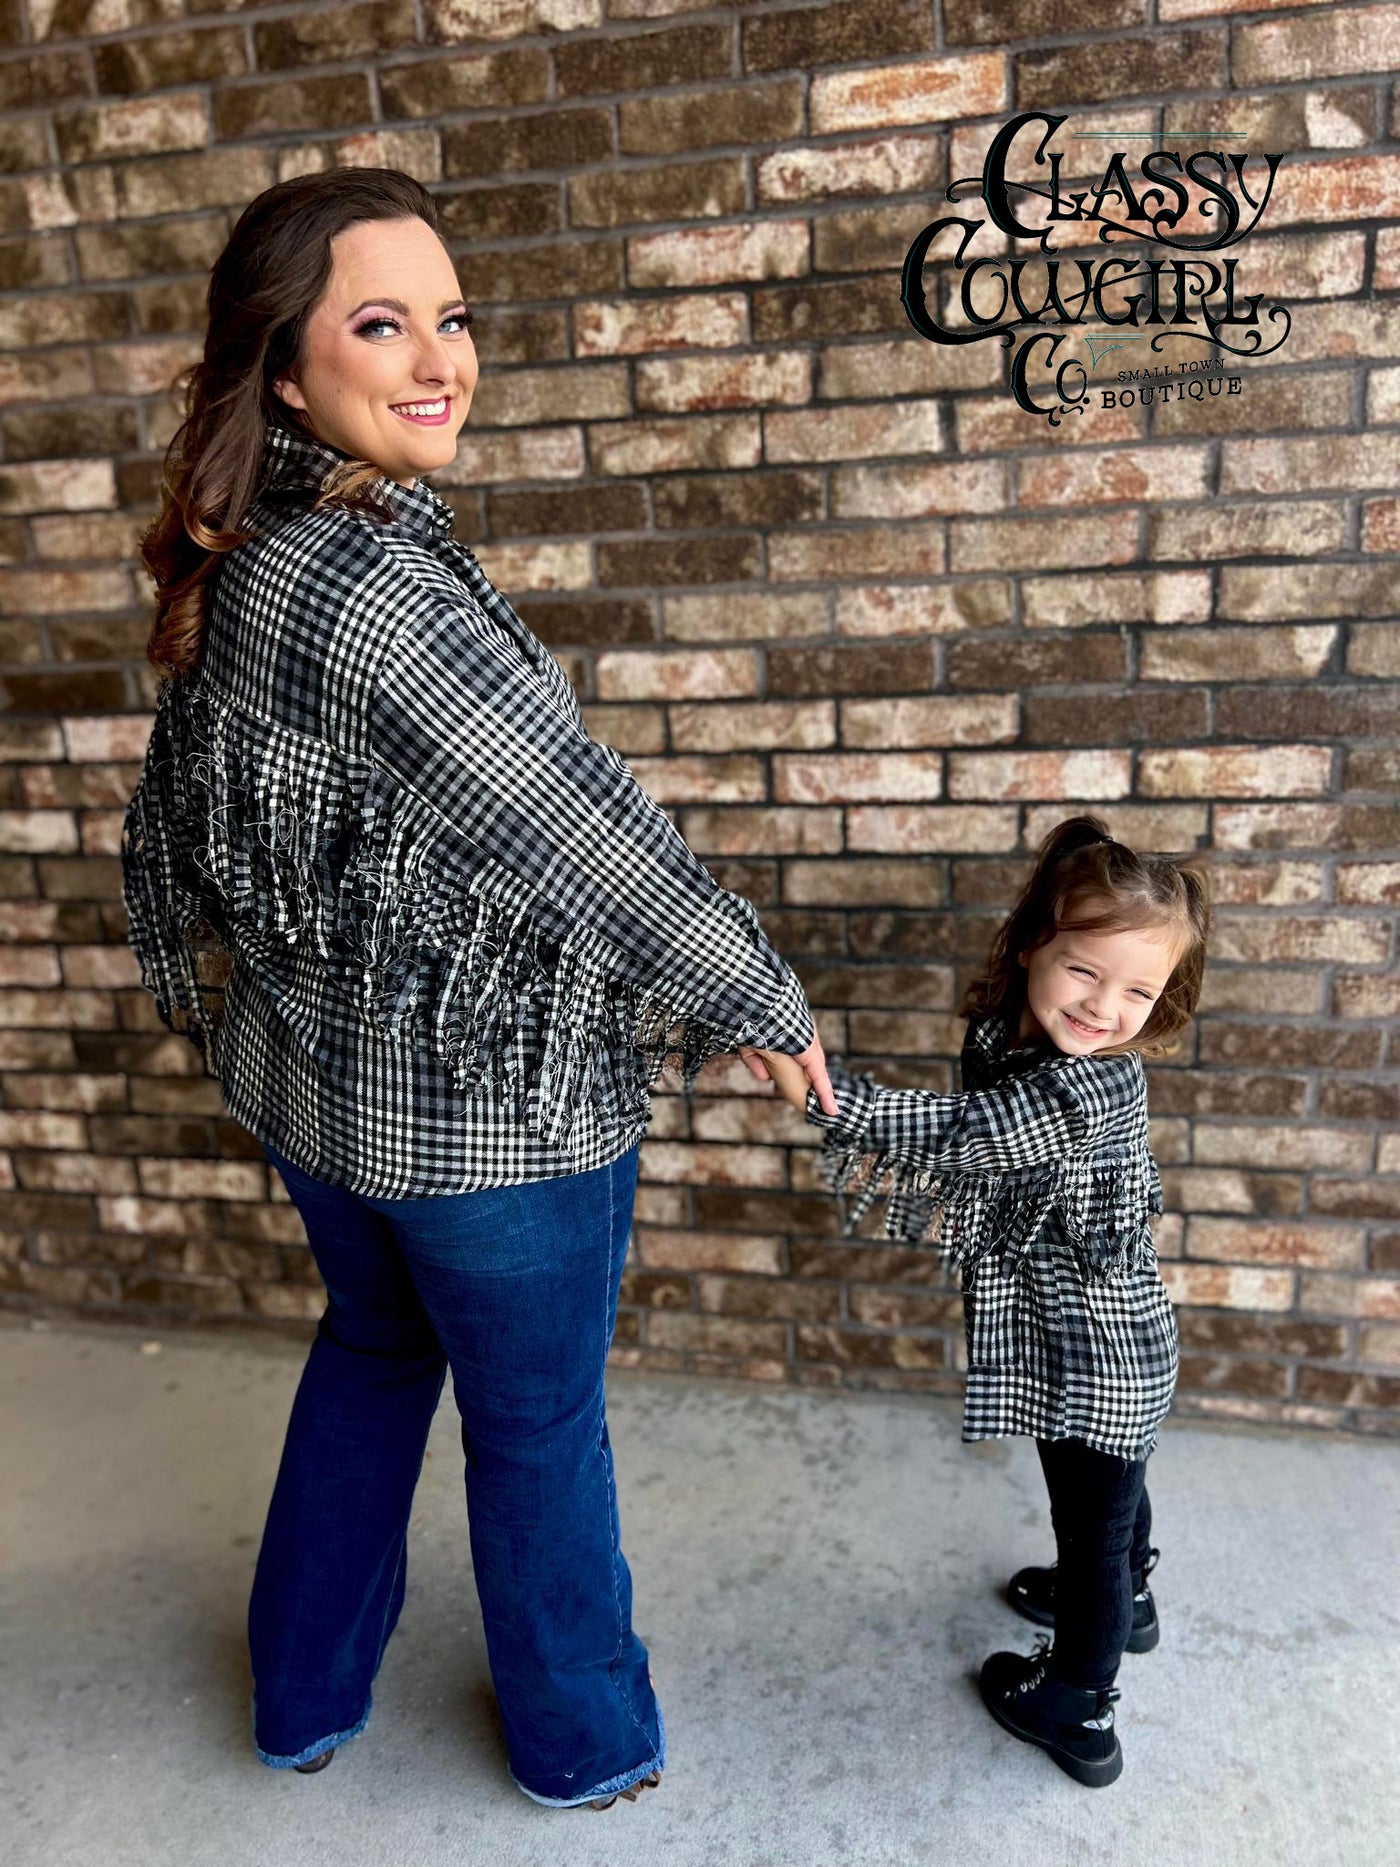 SALE- Back in Time Plaid Top with Fringe- Adult Size